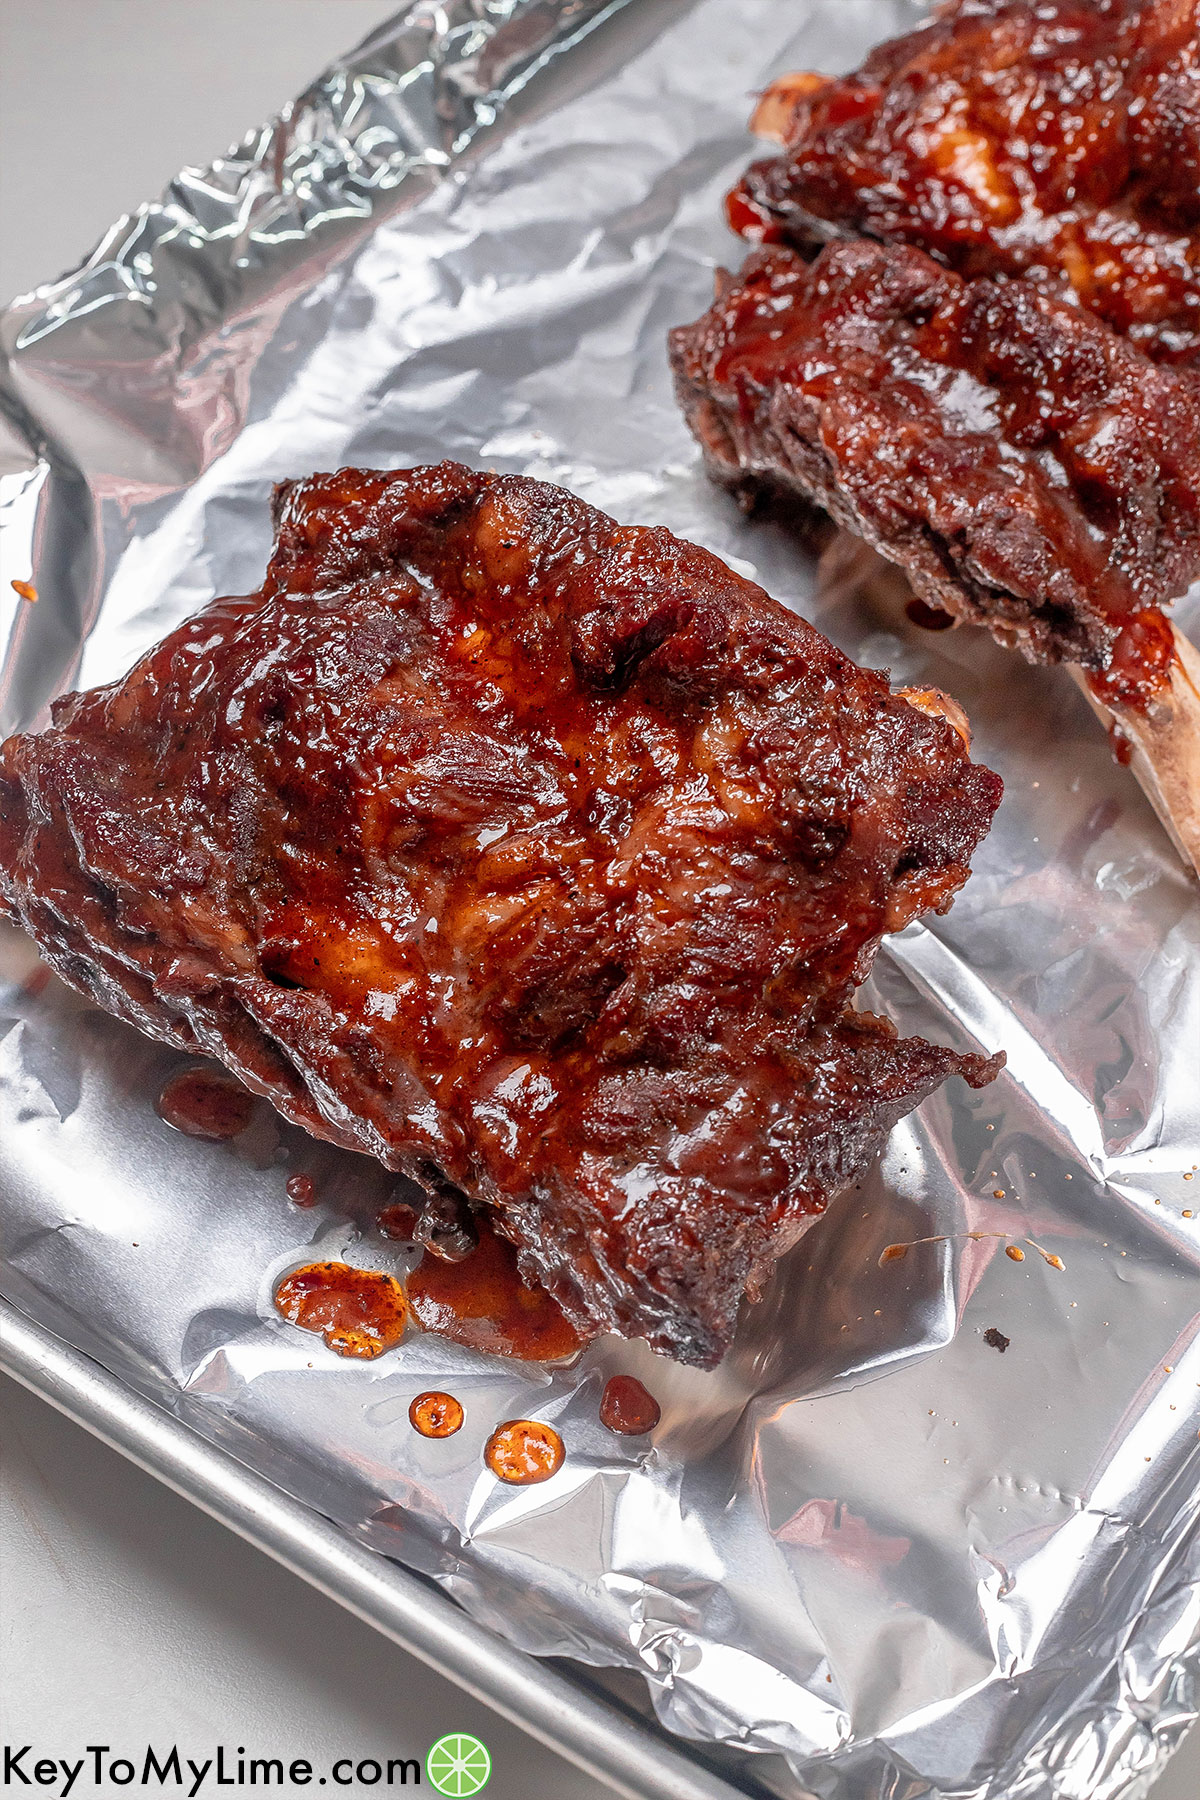 A side image of a couple of broiled ribs fresh out of the oven on a lined baking sheet.